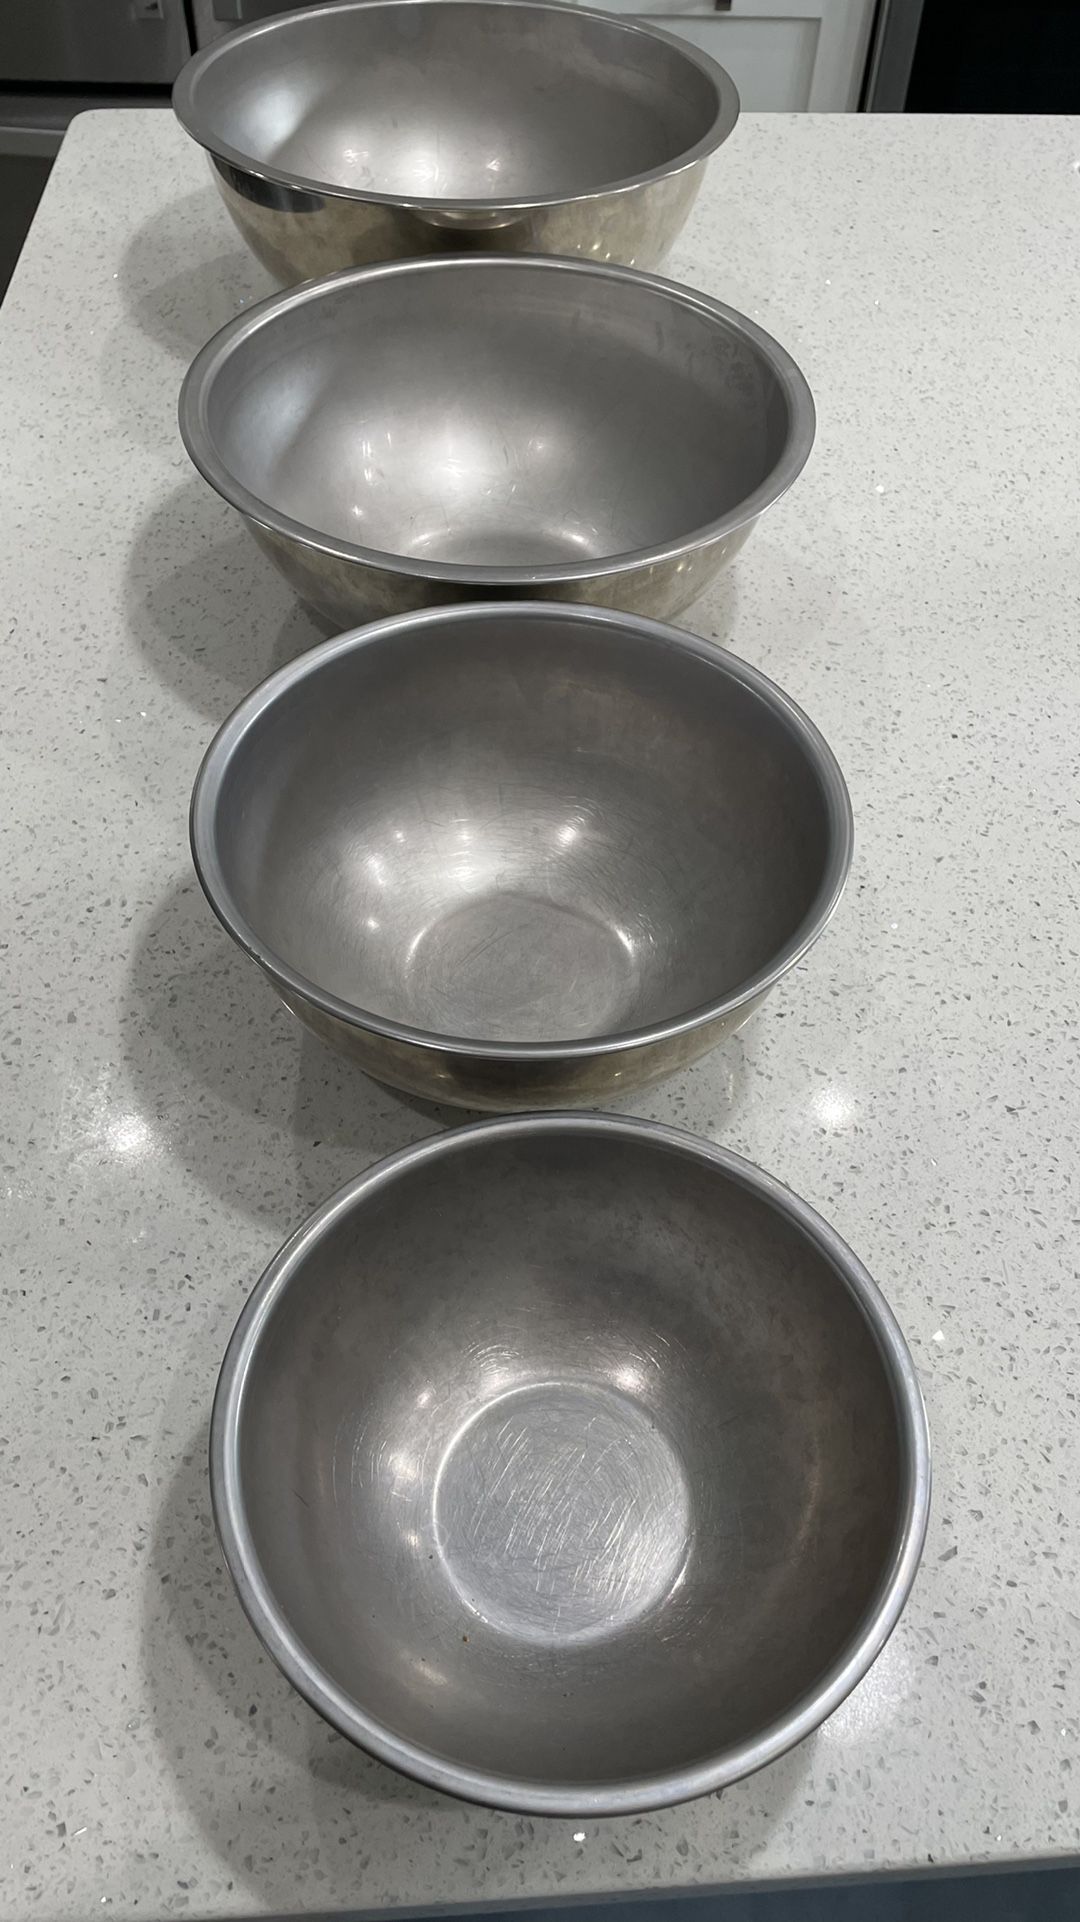 Stainless Steel Bowls 